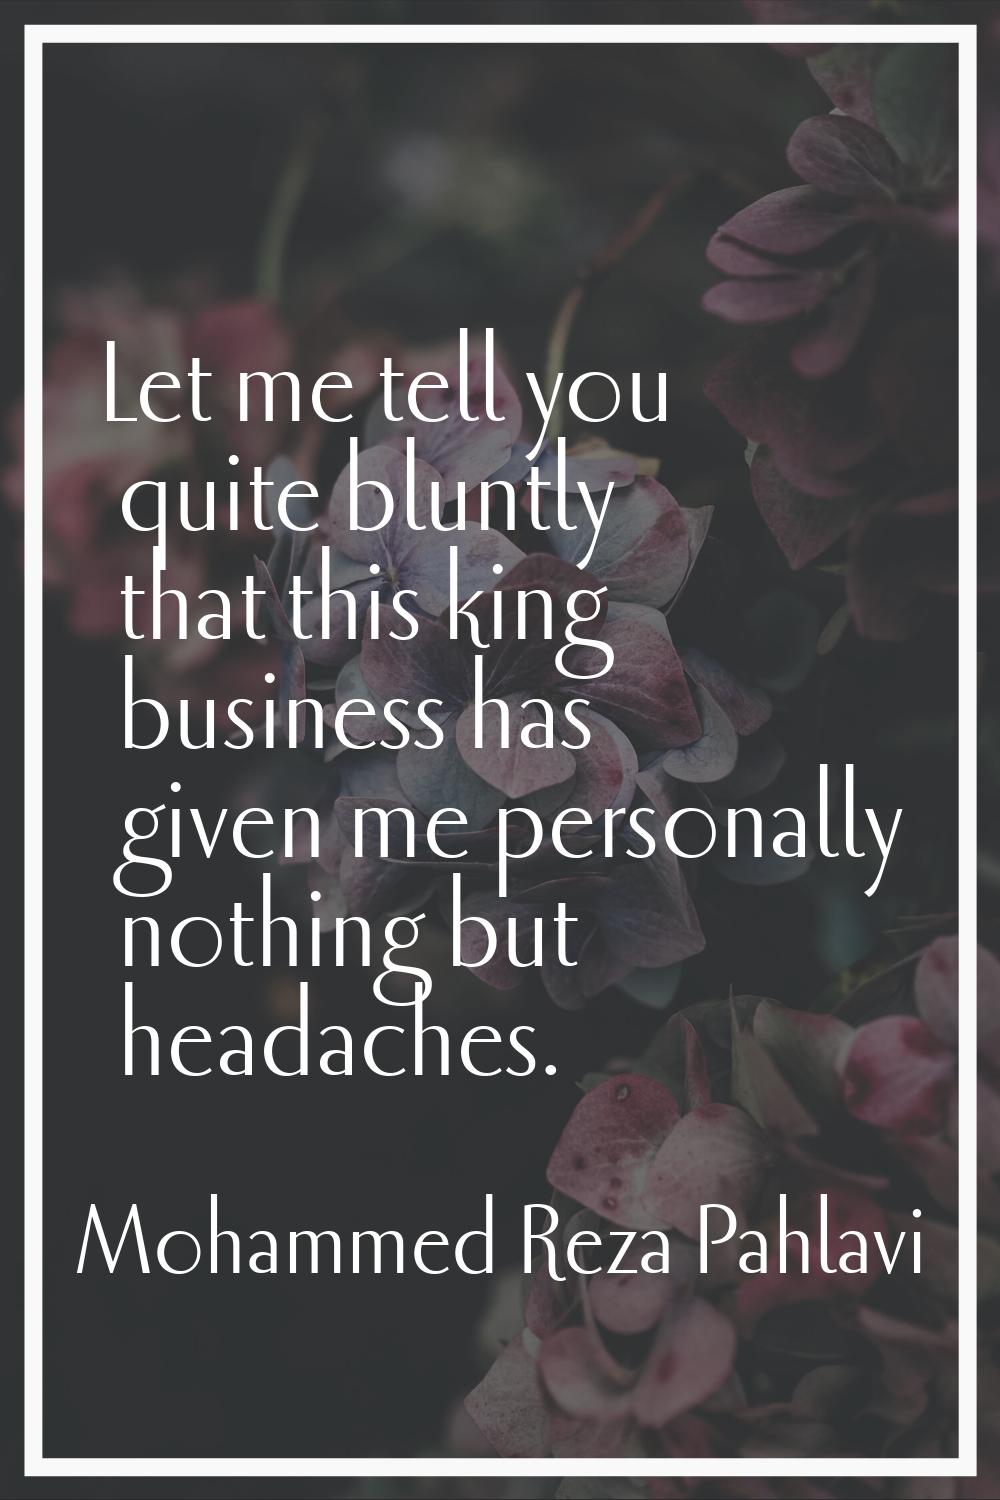 Let me tell you quite bluntly that this king business has given me personally nothing but headaches